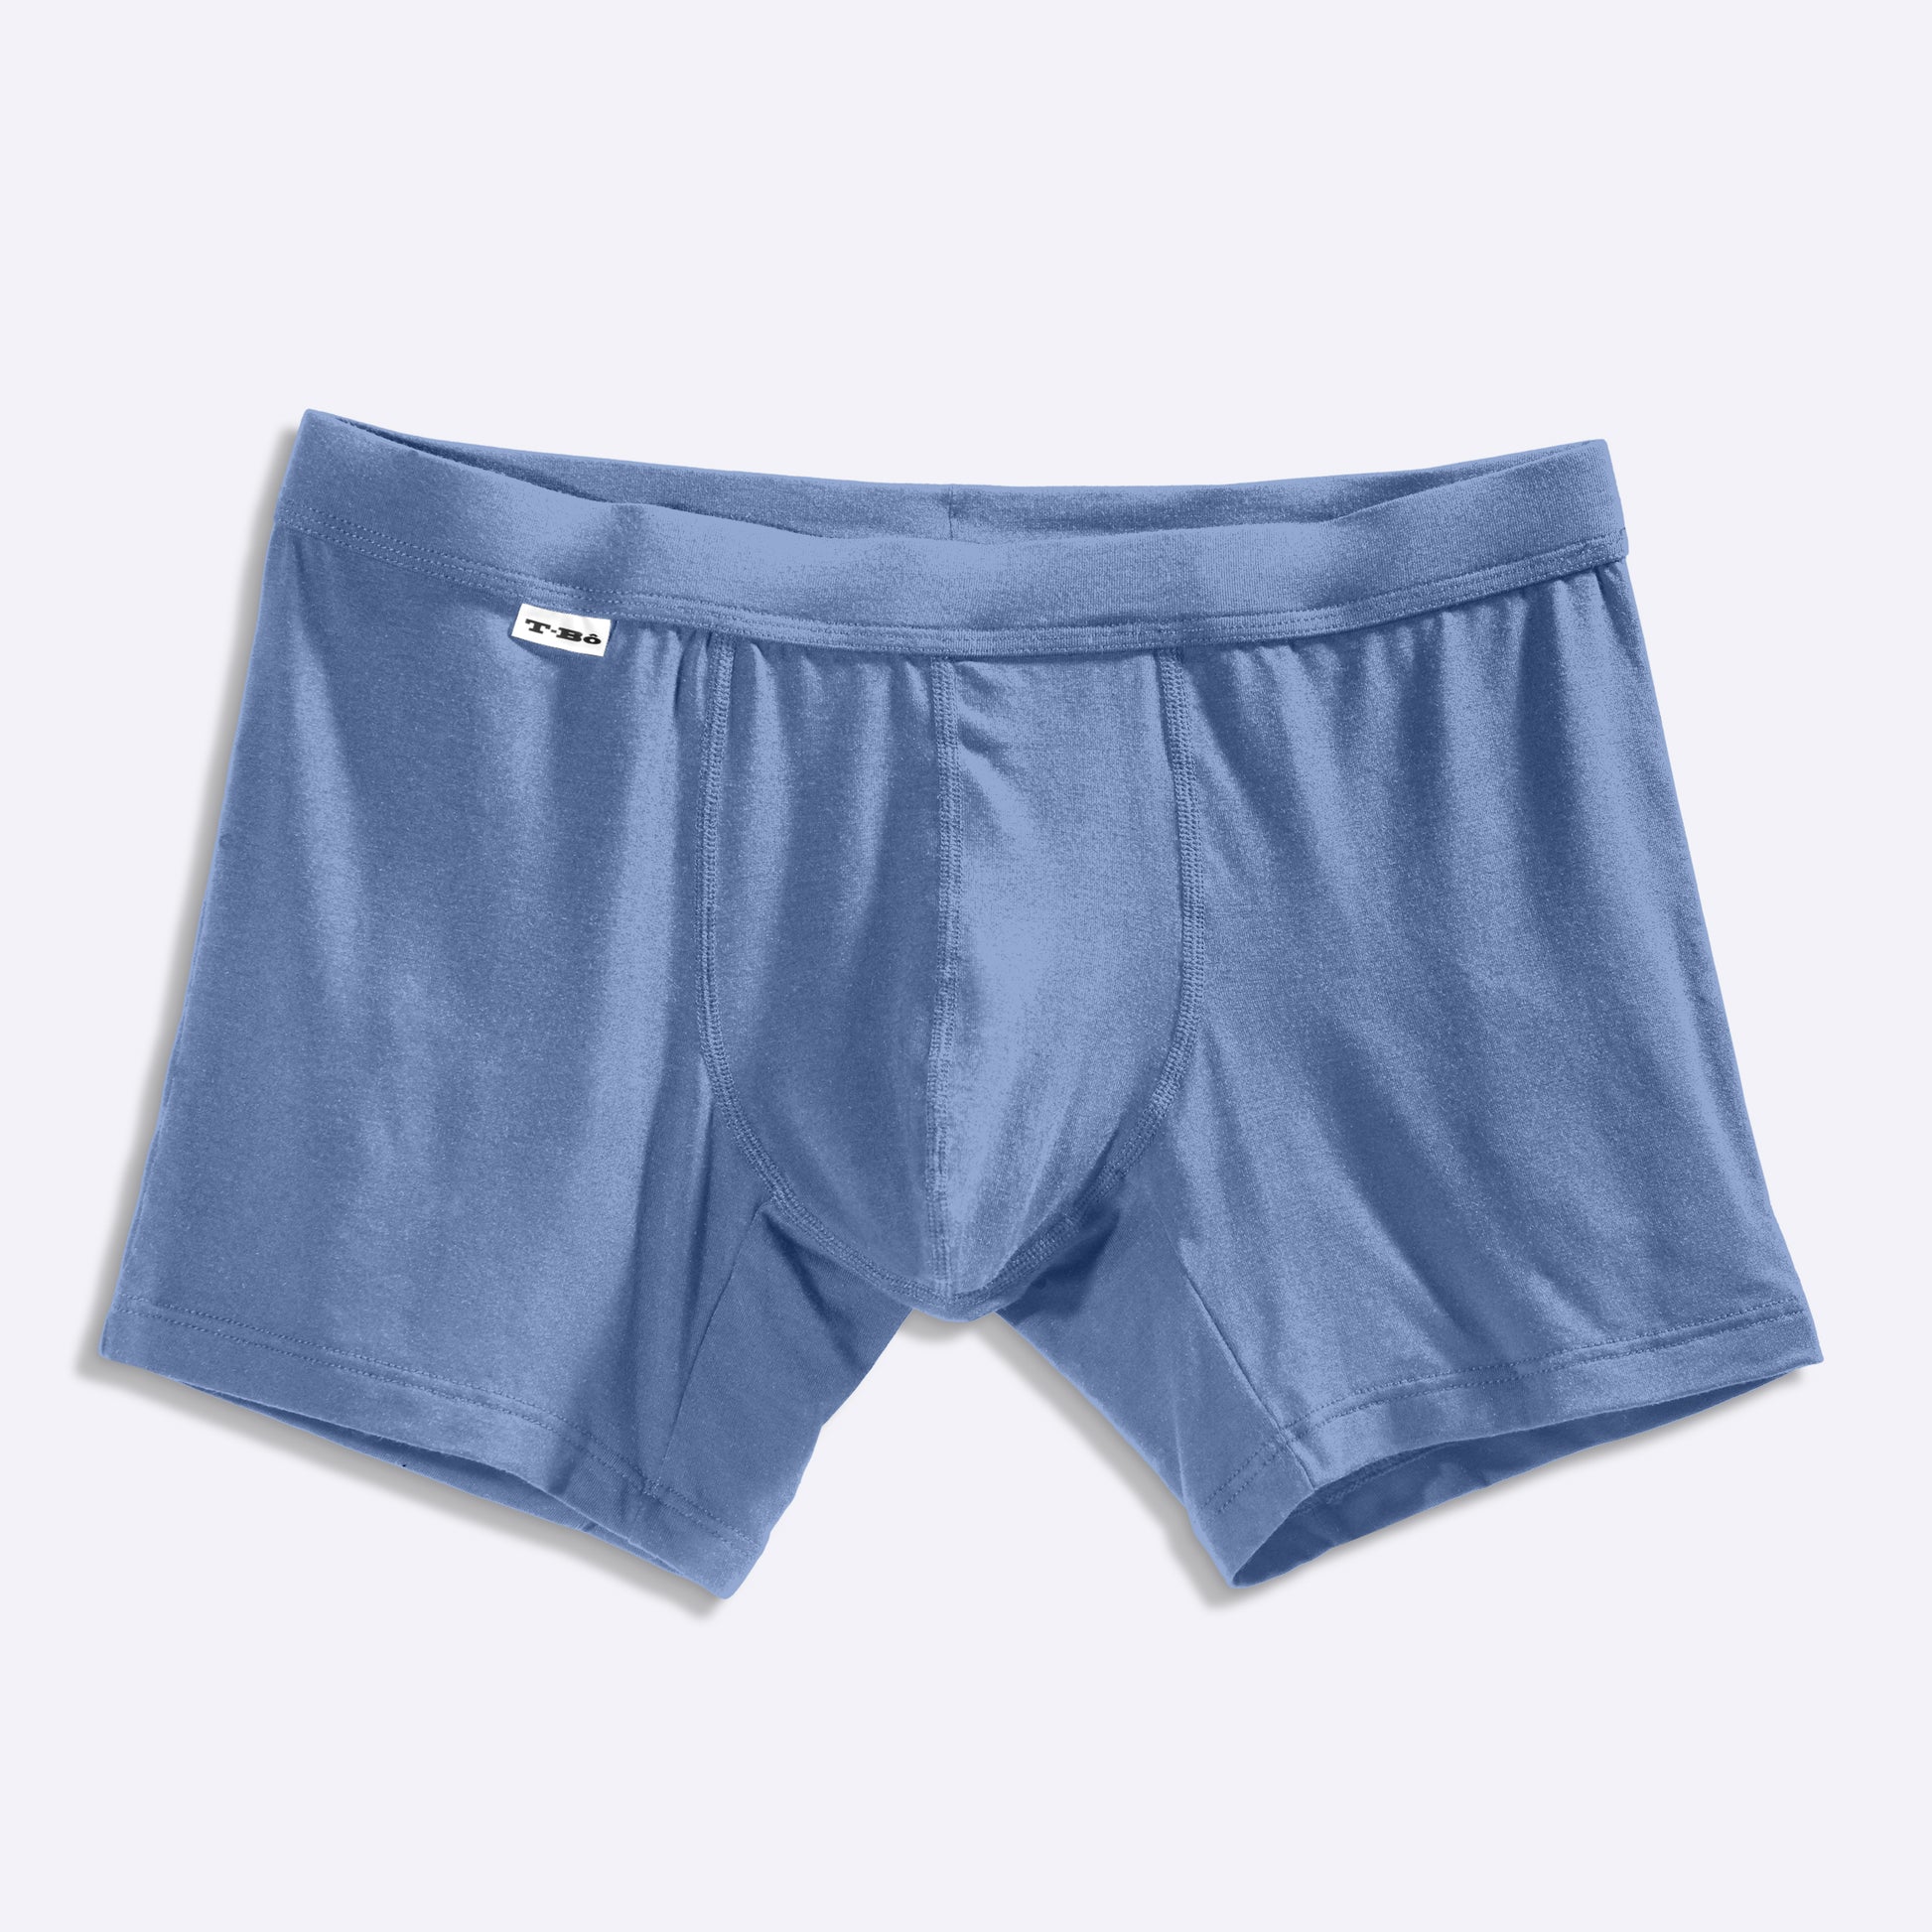 The Limited Edition Serenity Boxer Brief for men in the USA and Canada